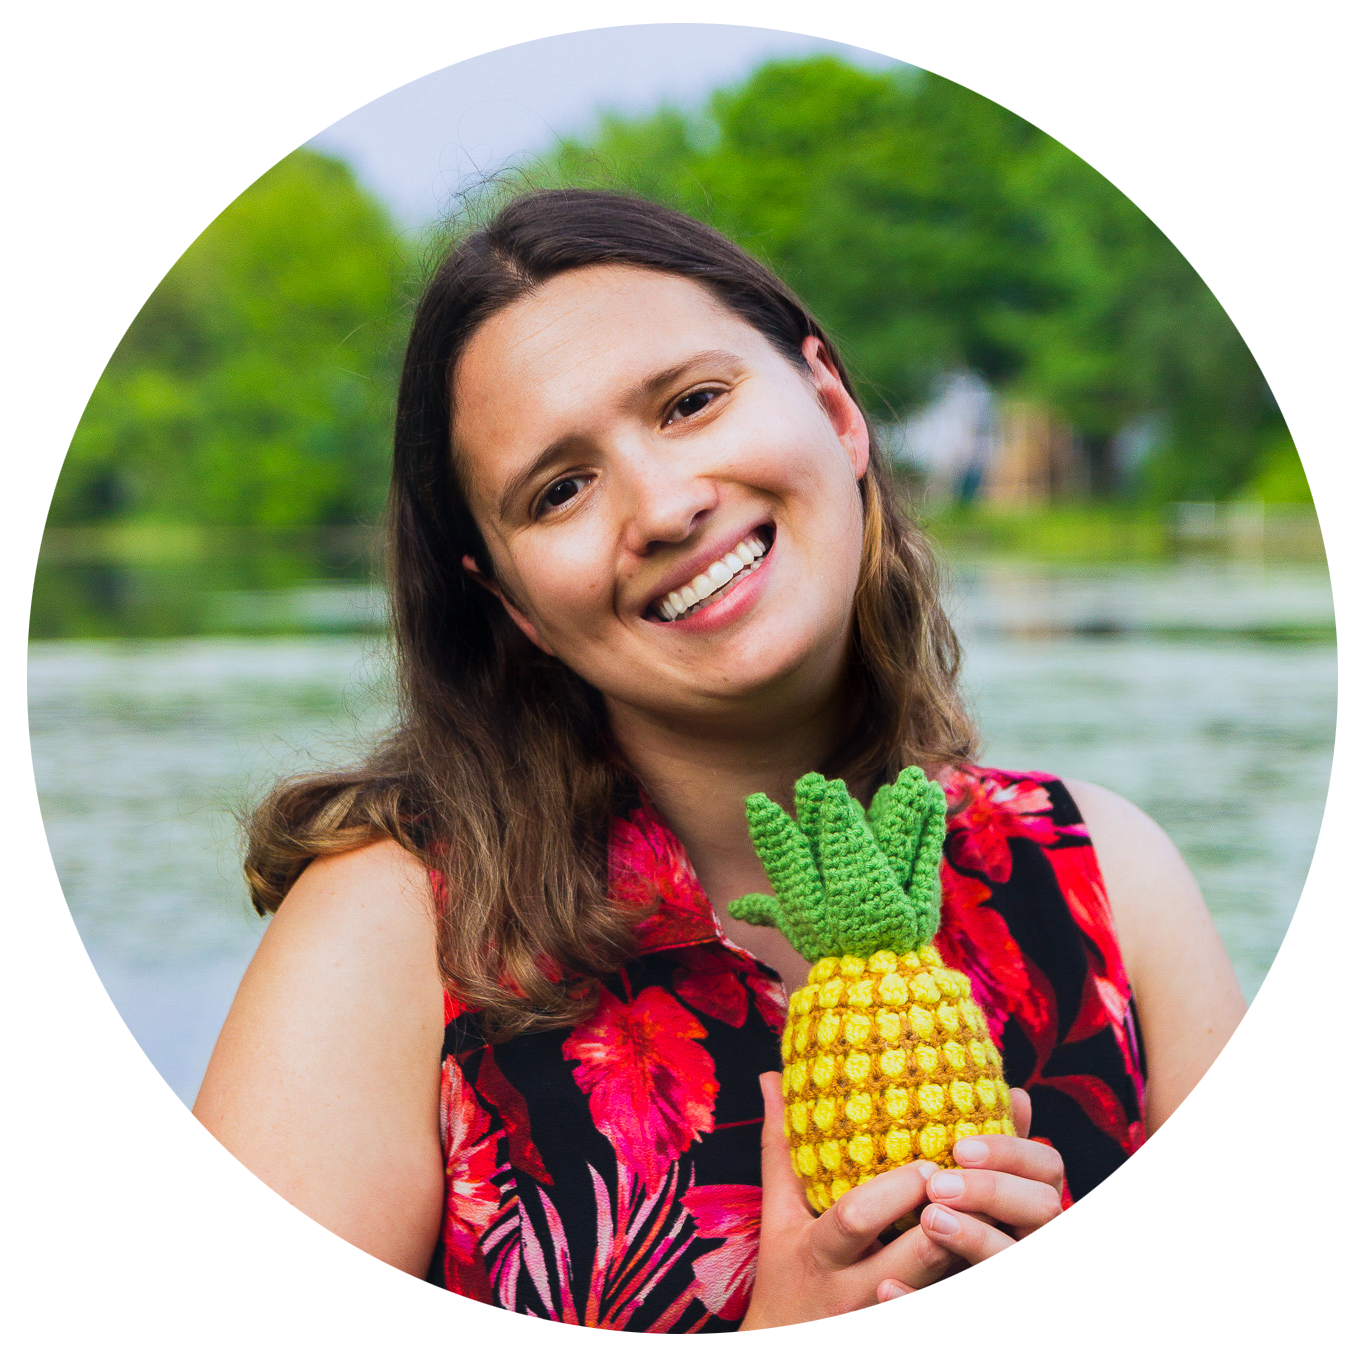 a picture of a young woman standing in front of a lake and holding a crochet pineapple